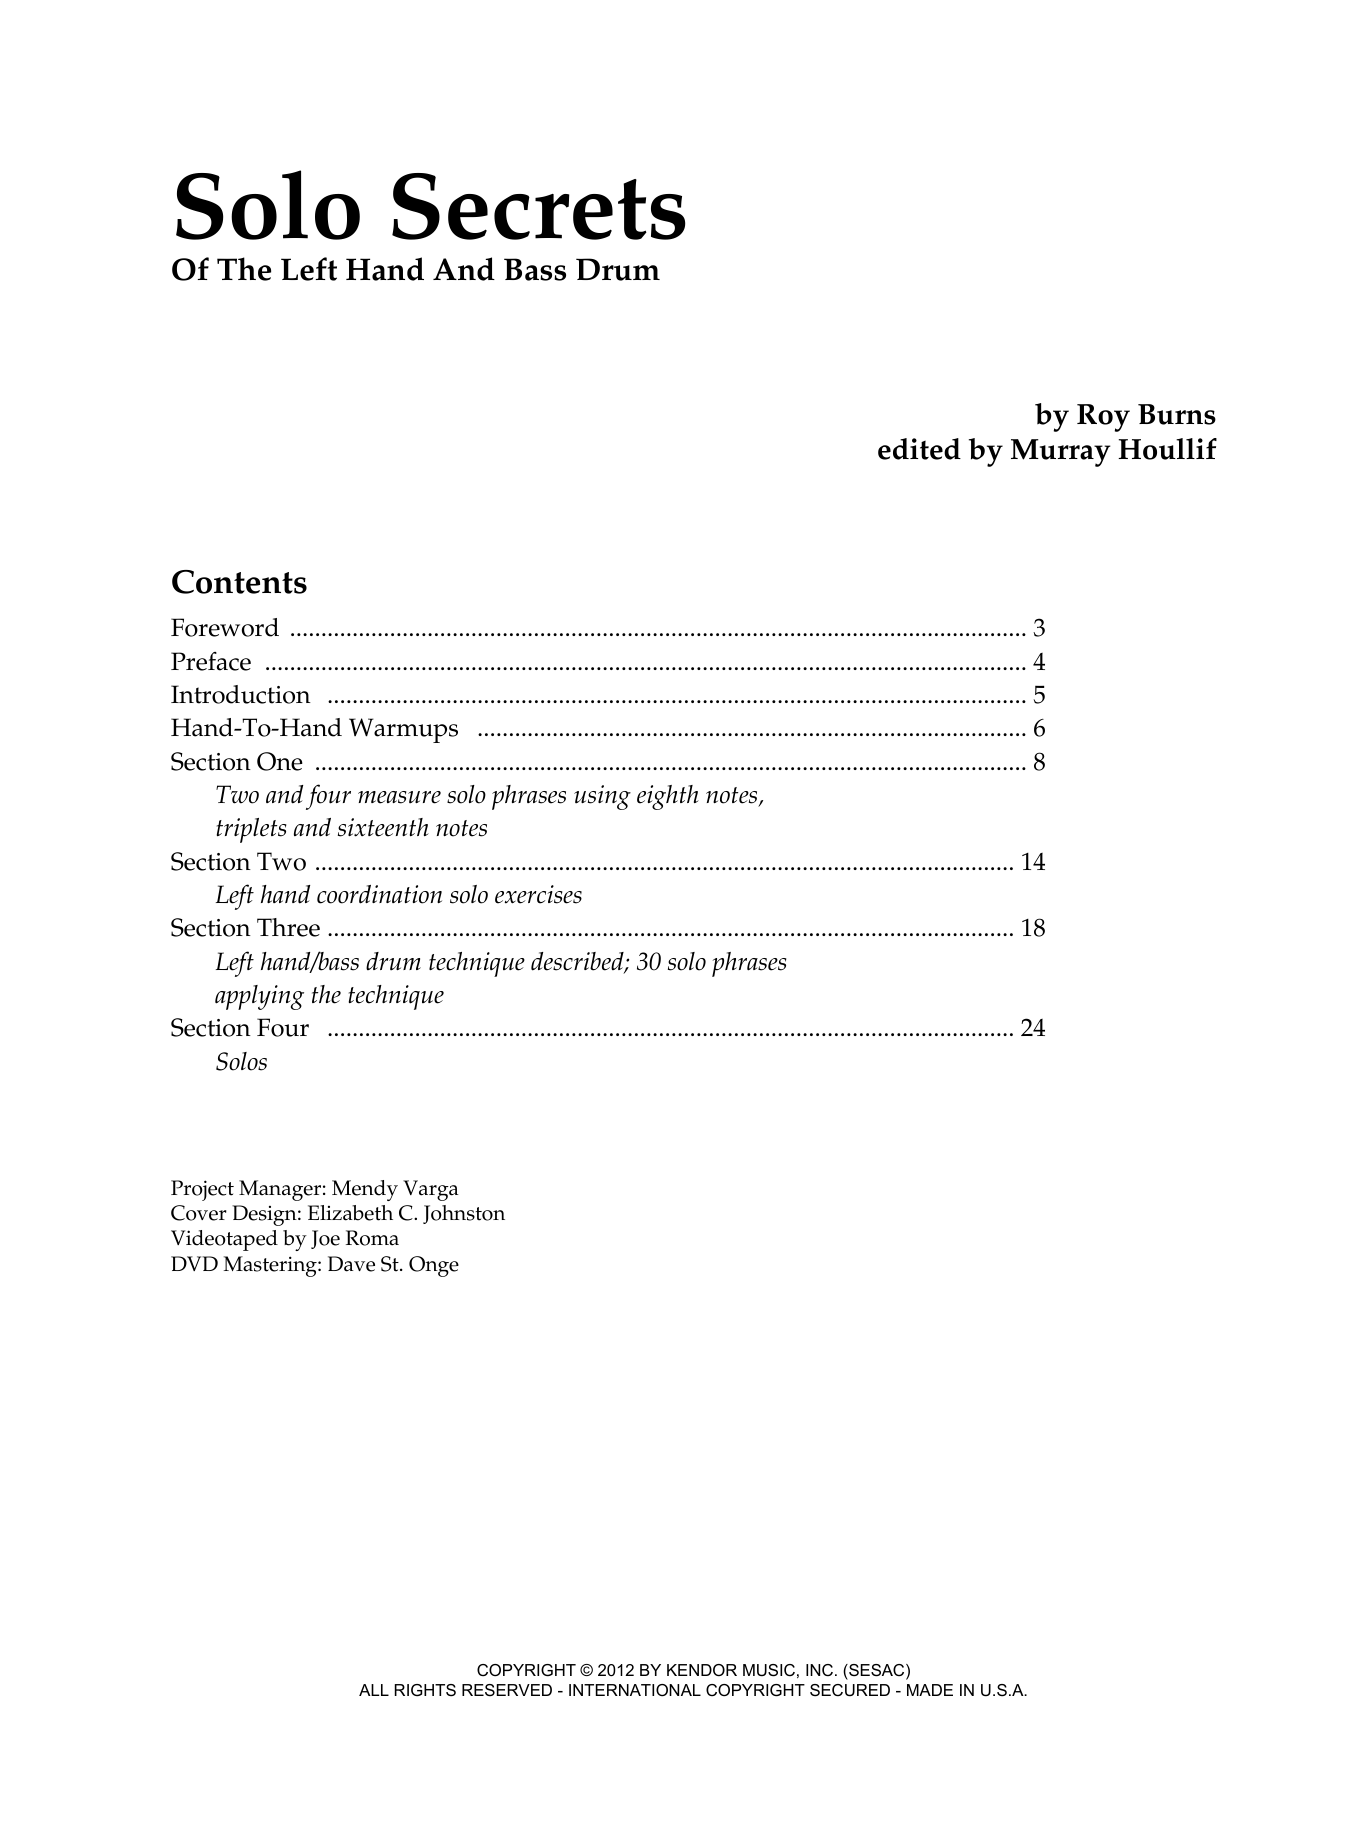 Download Murray Houllif Solo Secrets - Of The Left Hand And Bas Sheet Music